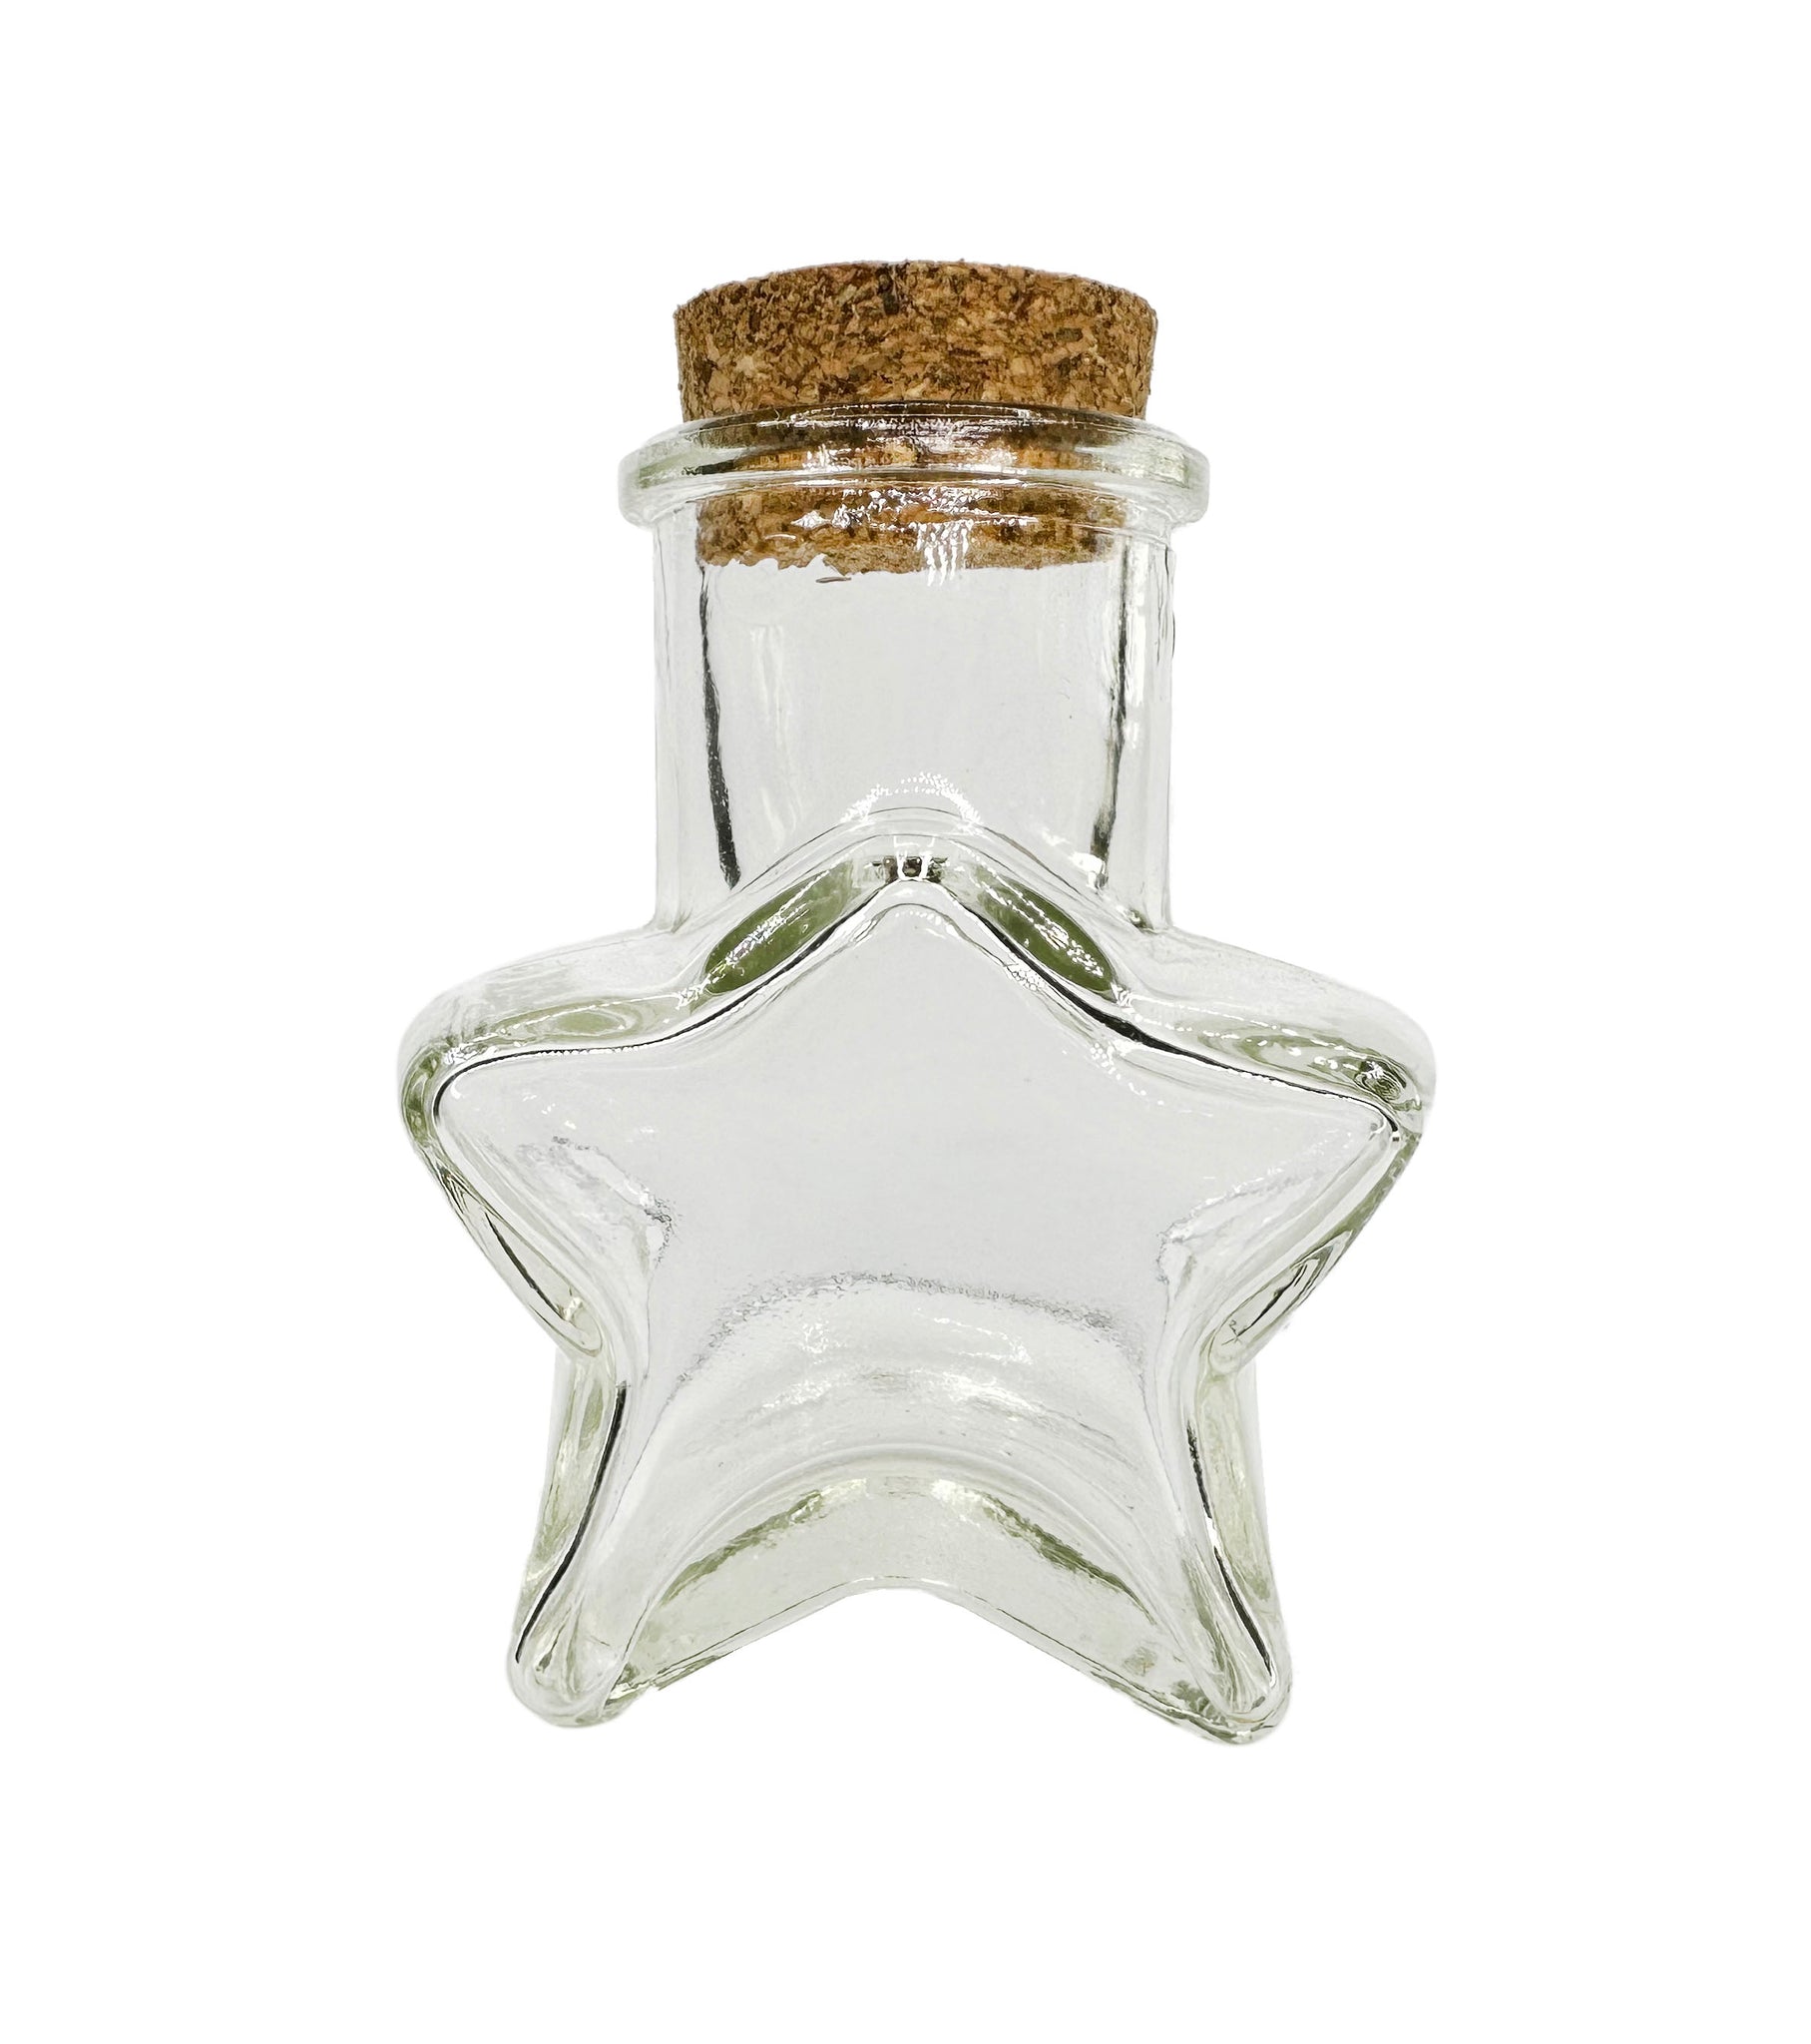 4 Pcs Small Glass Jars with Cork Lids Heart and Star Shaped Candy Jars  Clear Storage Container Jars Wishing Bottles Drift Bottles Cookie Jars  Craft